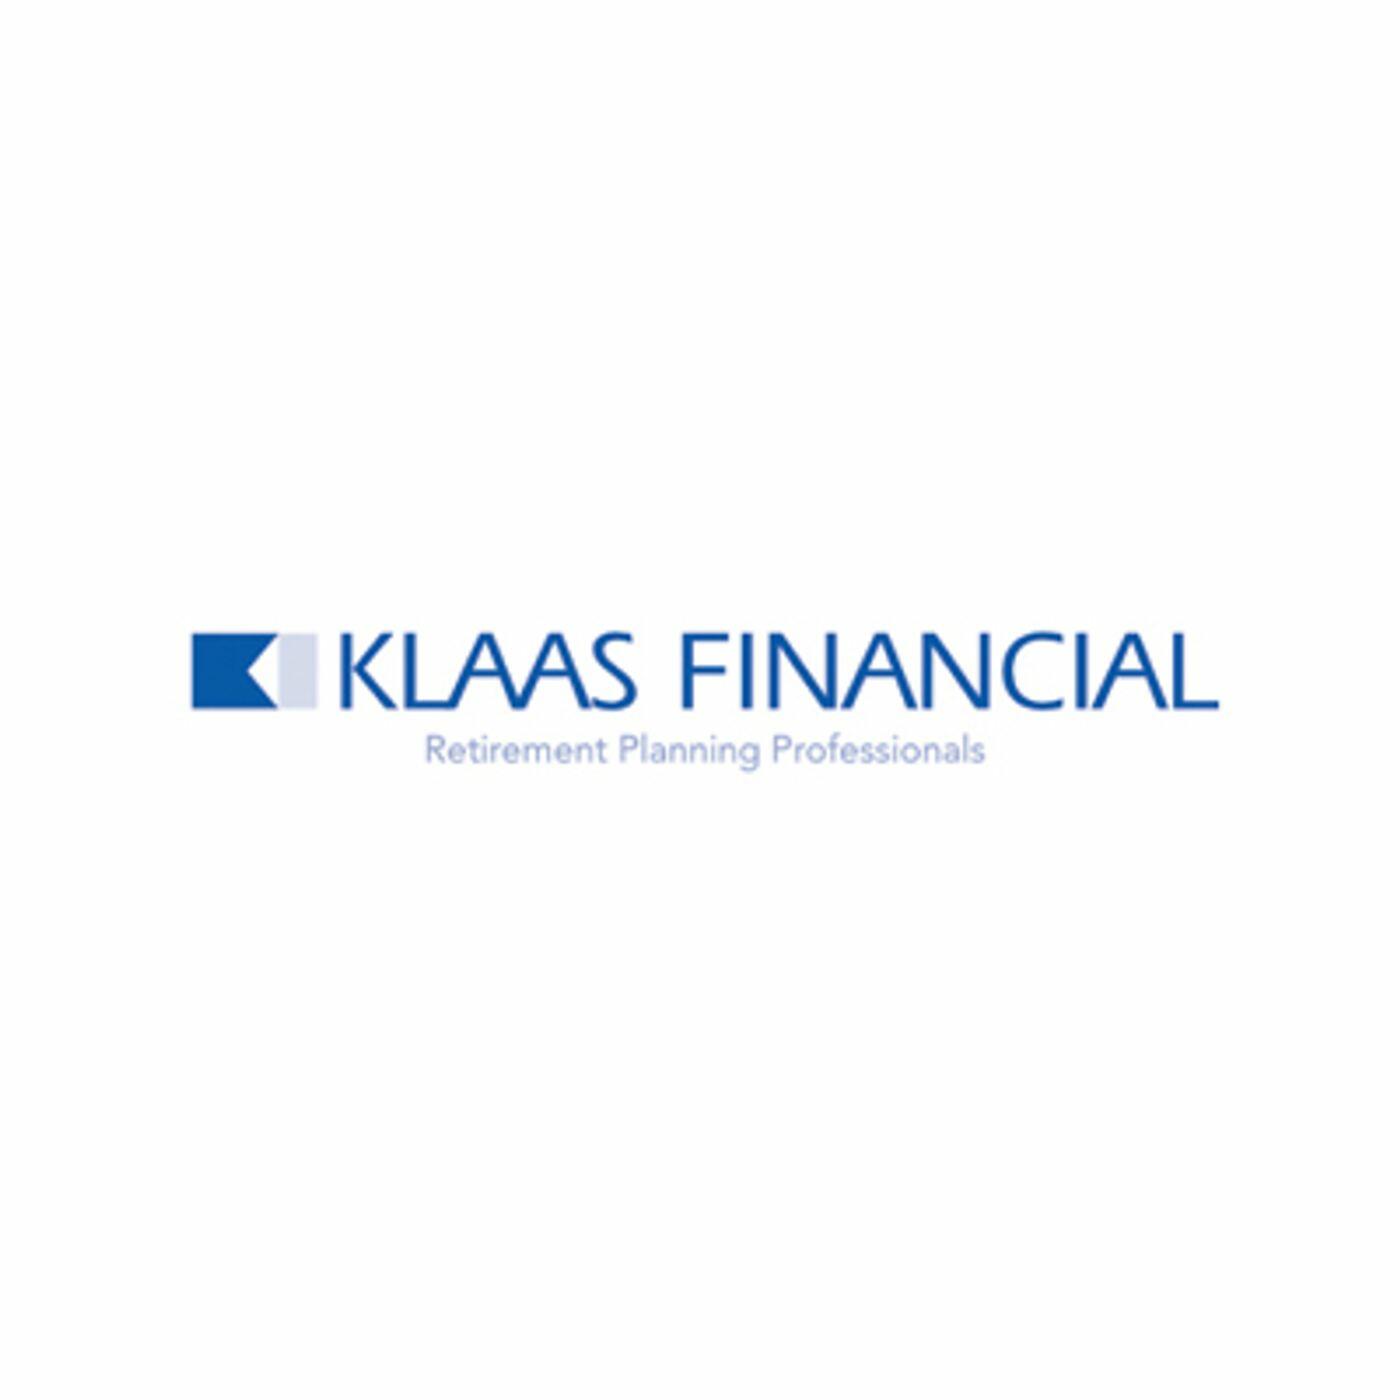 Listen to the Money In Motion with Klaas Financial Episode - Klaas Financial, Who They ...